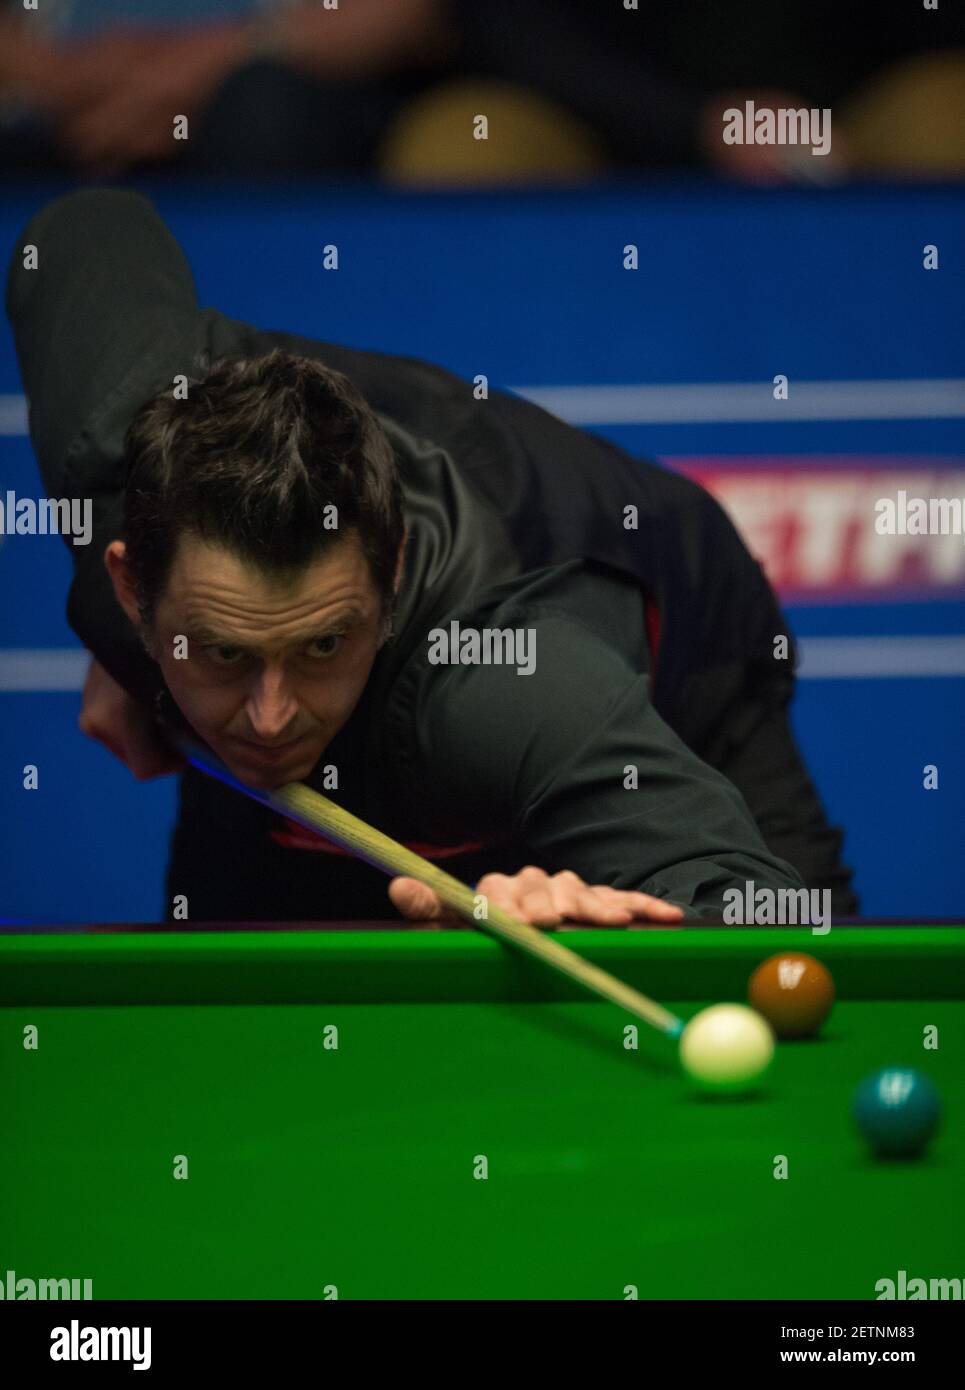 hval animation meddelelse SP) BRITAIN-SHEFFIELD-SNOOKER-WORLD SNOOKER CHAMPIONSHIP-WILSON VS  O'SULLIVAN (170417) -- SHEFFIELD, Apr. 17, 2017 (Xinhua) -- Ronnie  O'Sullivan of England competes during his first round match against Gary  Wilson of England during the World